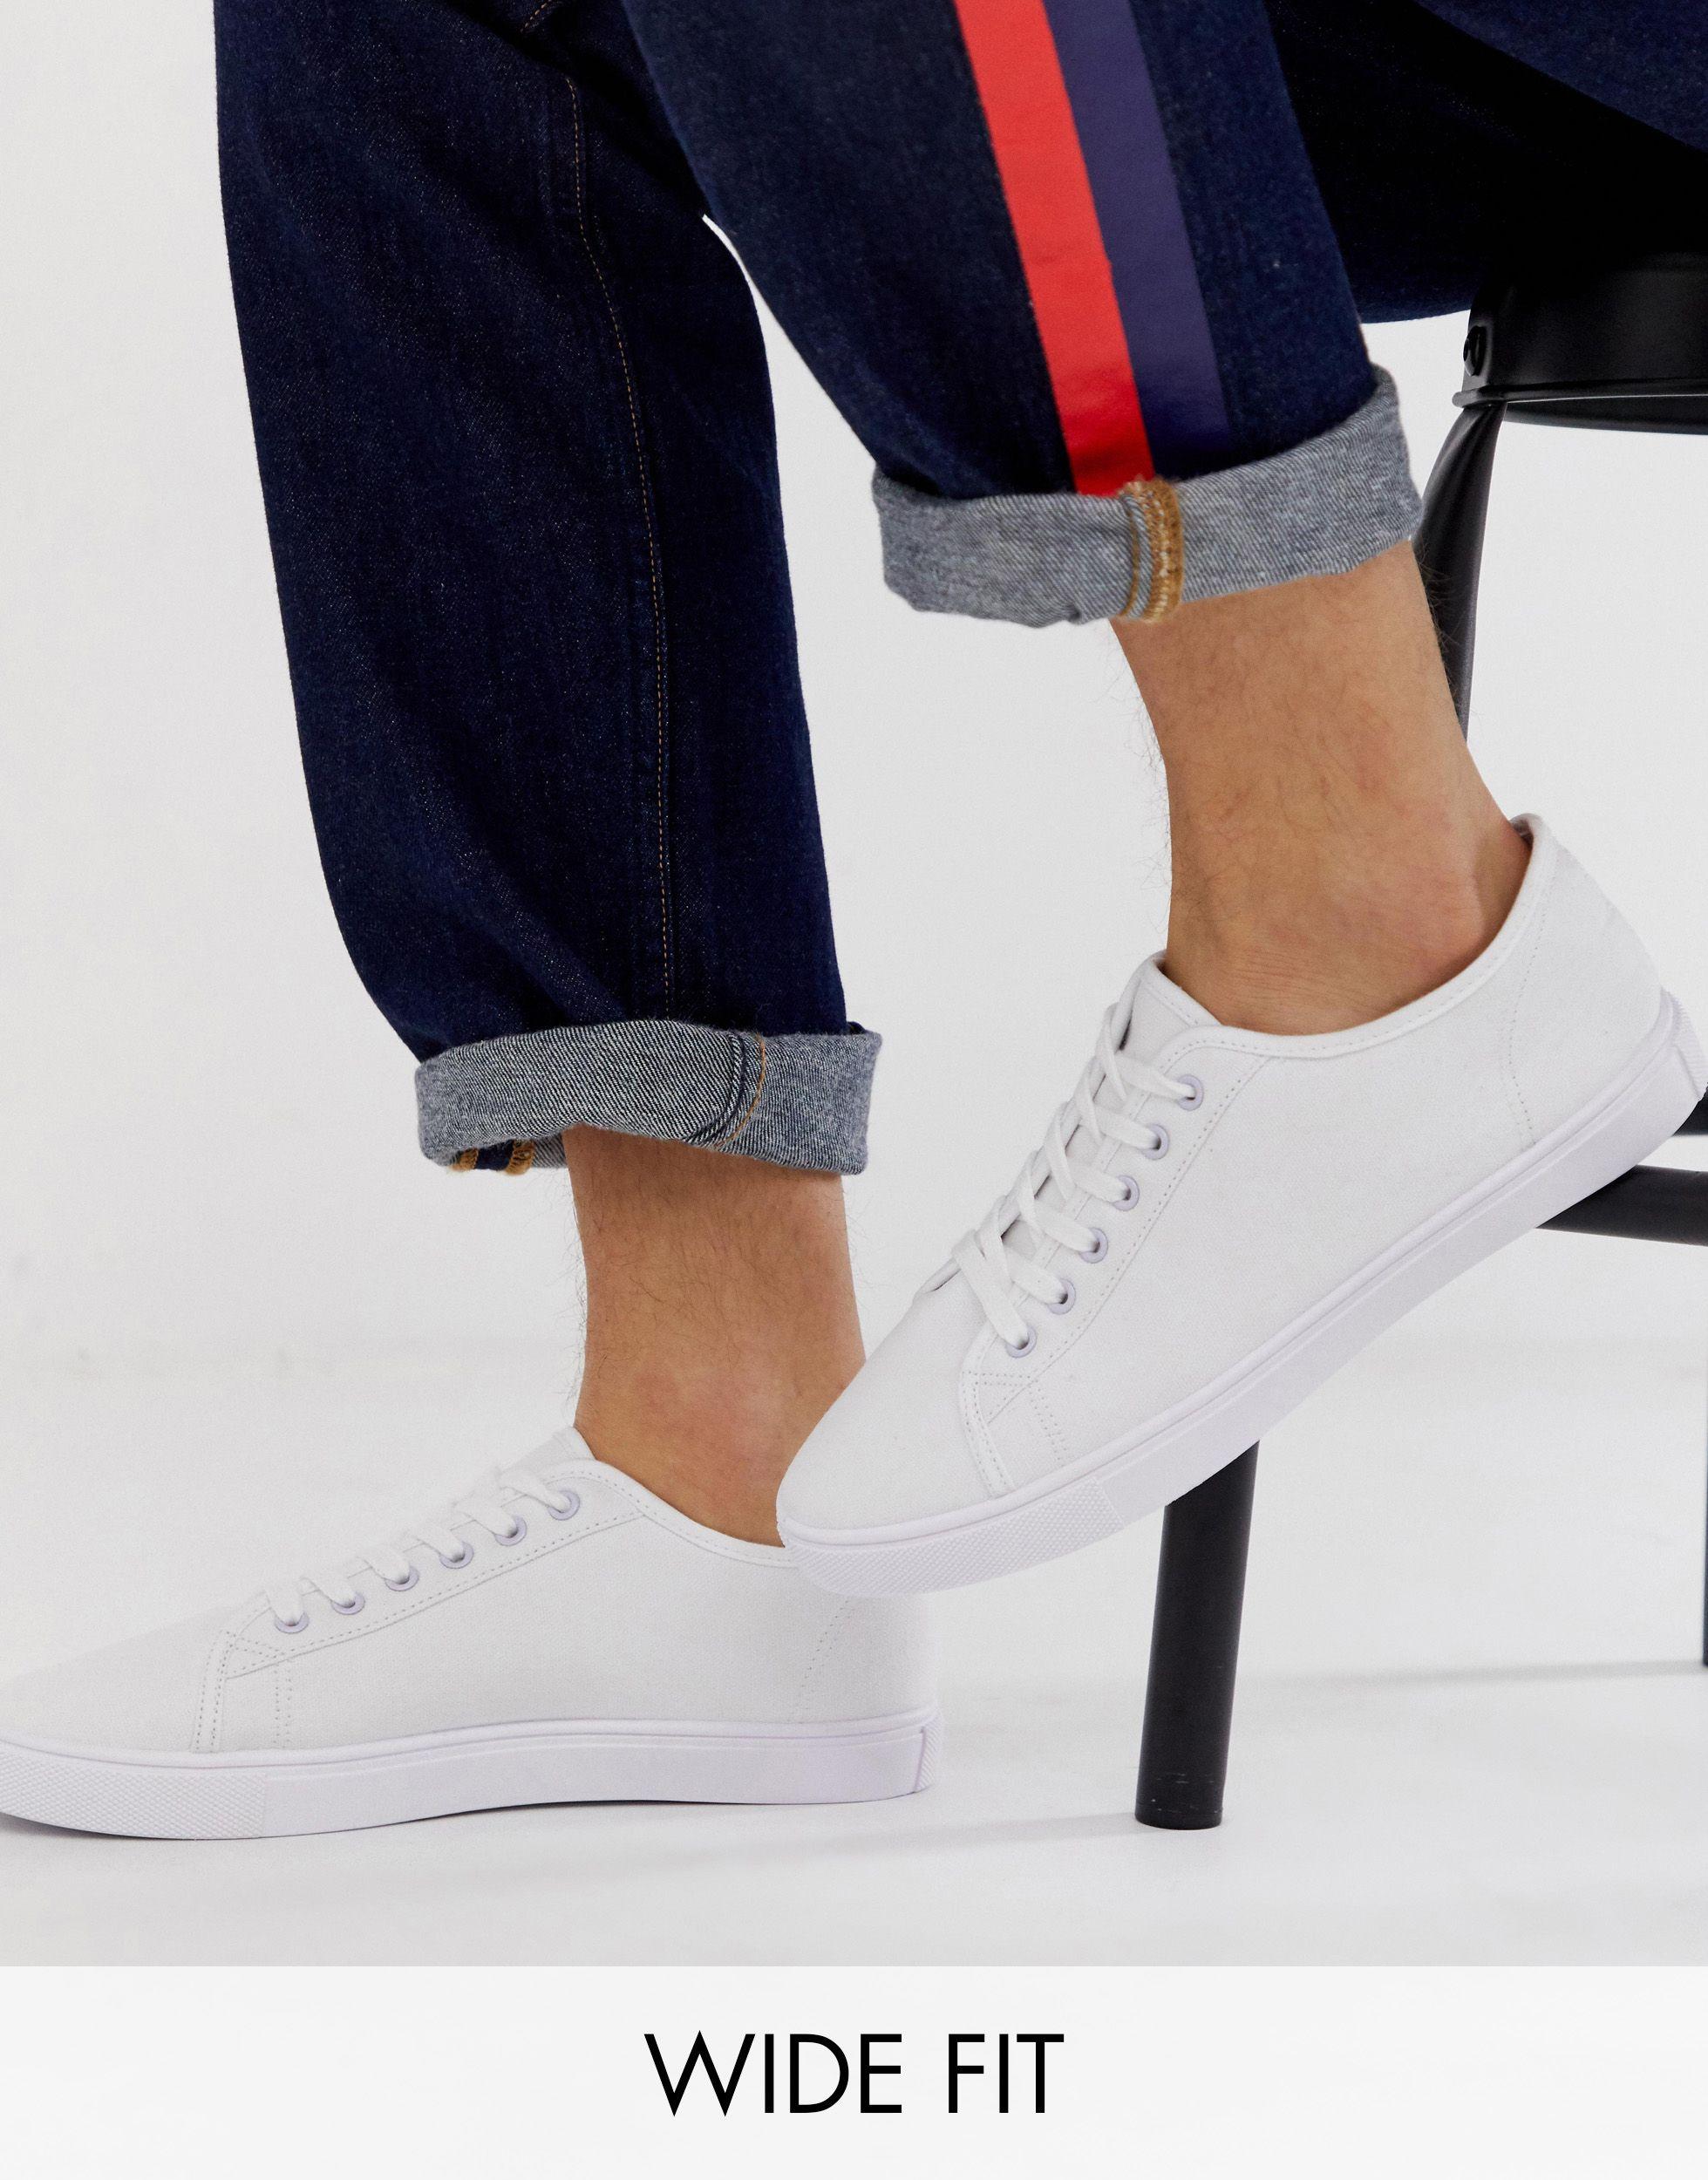 ASOS Canvas Wide Fit Trainers in White for Men - Lyst